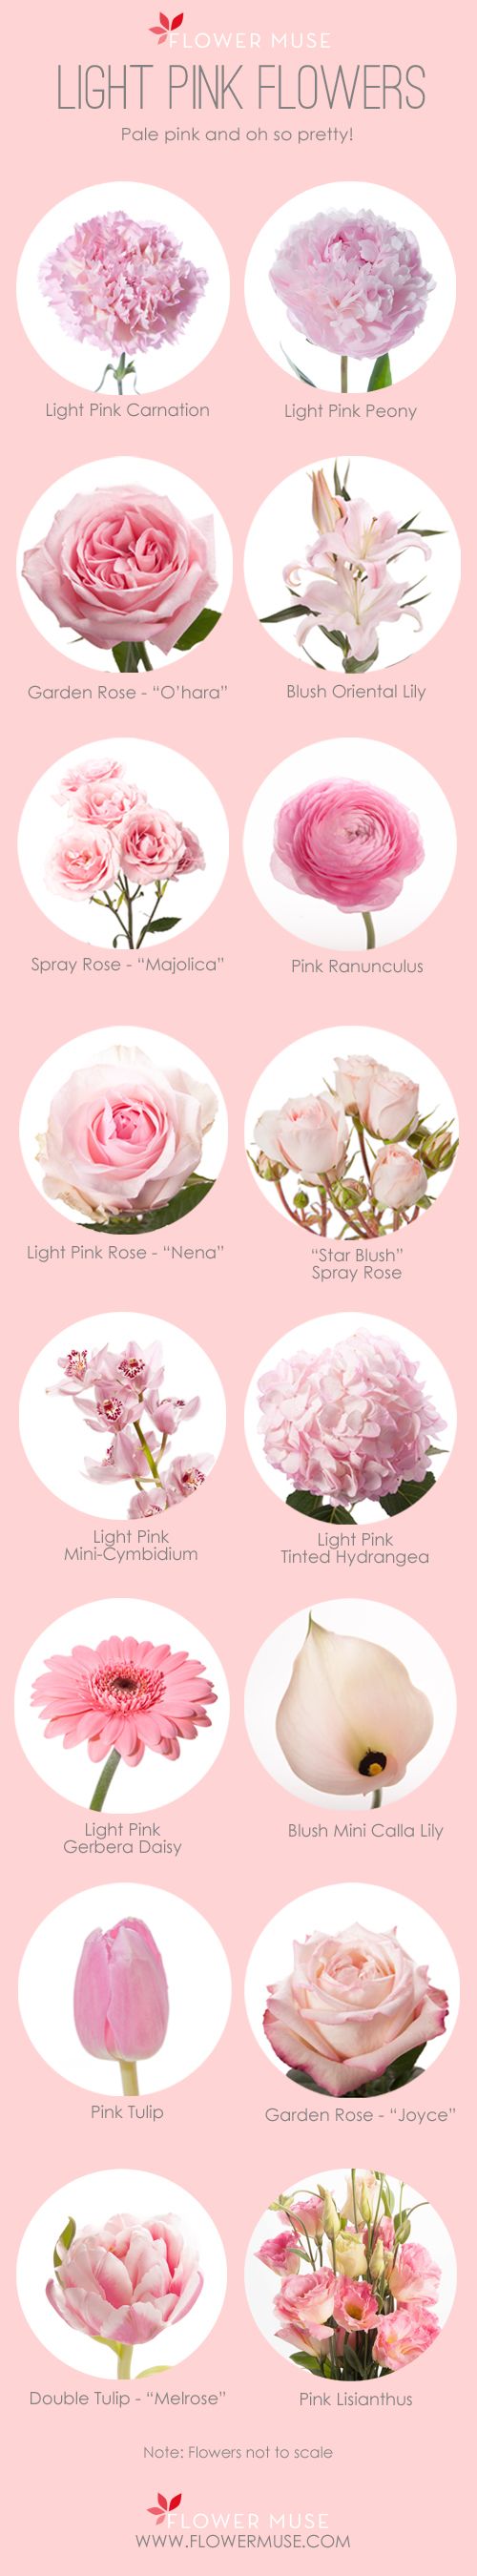 We've put together our list of favorite light pink flowers to inspire you to...